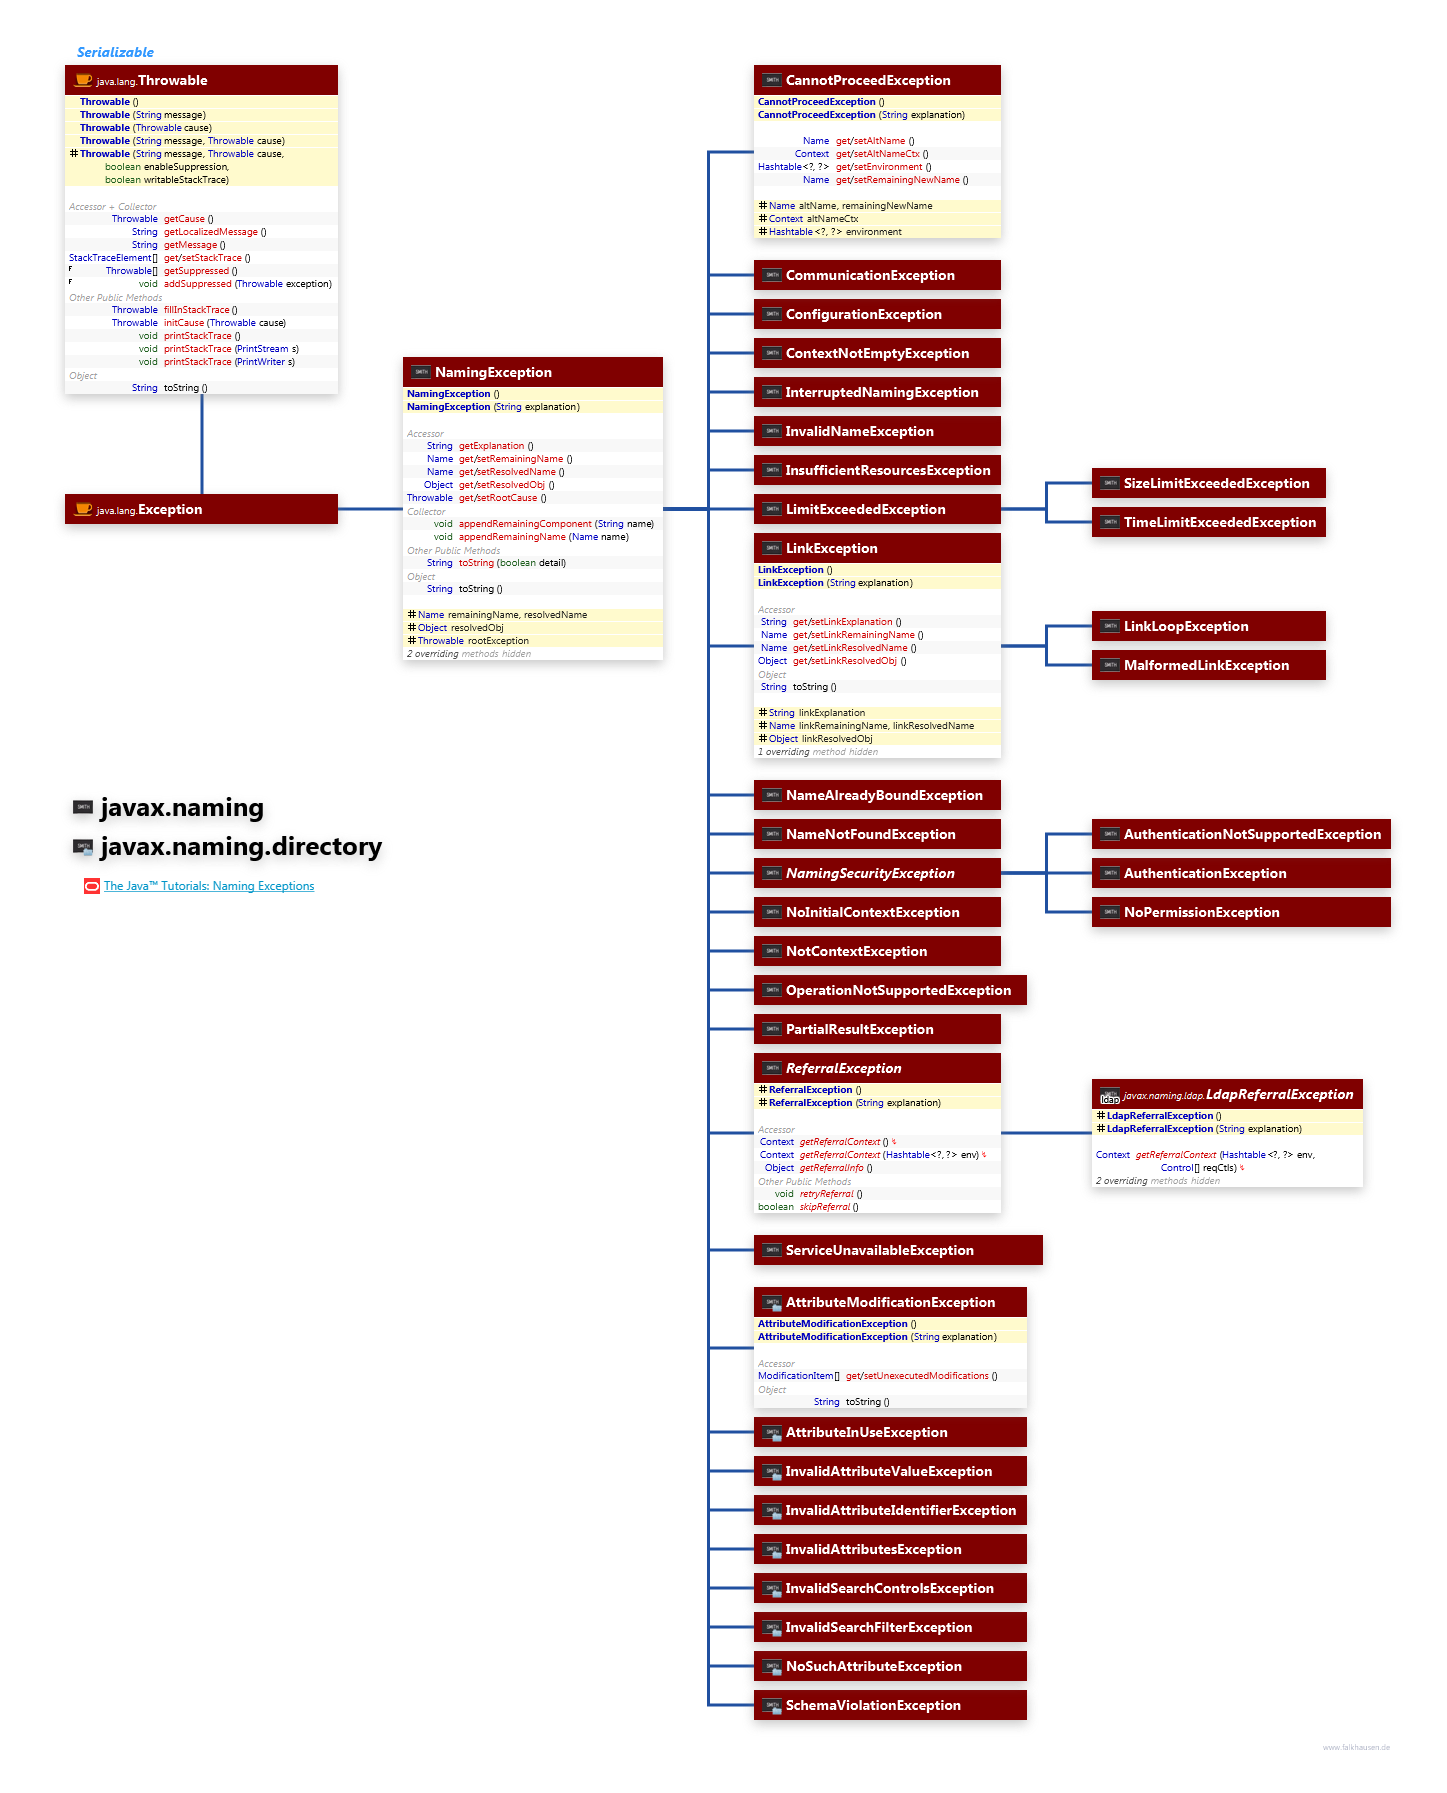 javax.naming javax.naming.directory Exceptions class diagram and api documentation for Java 8